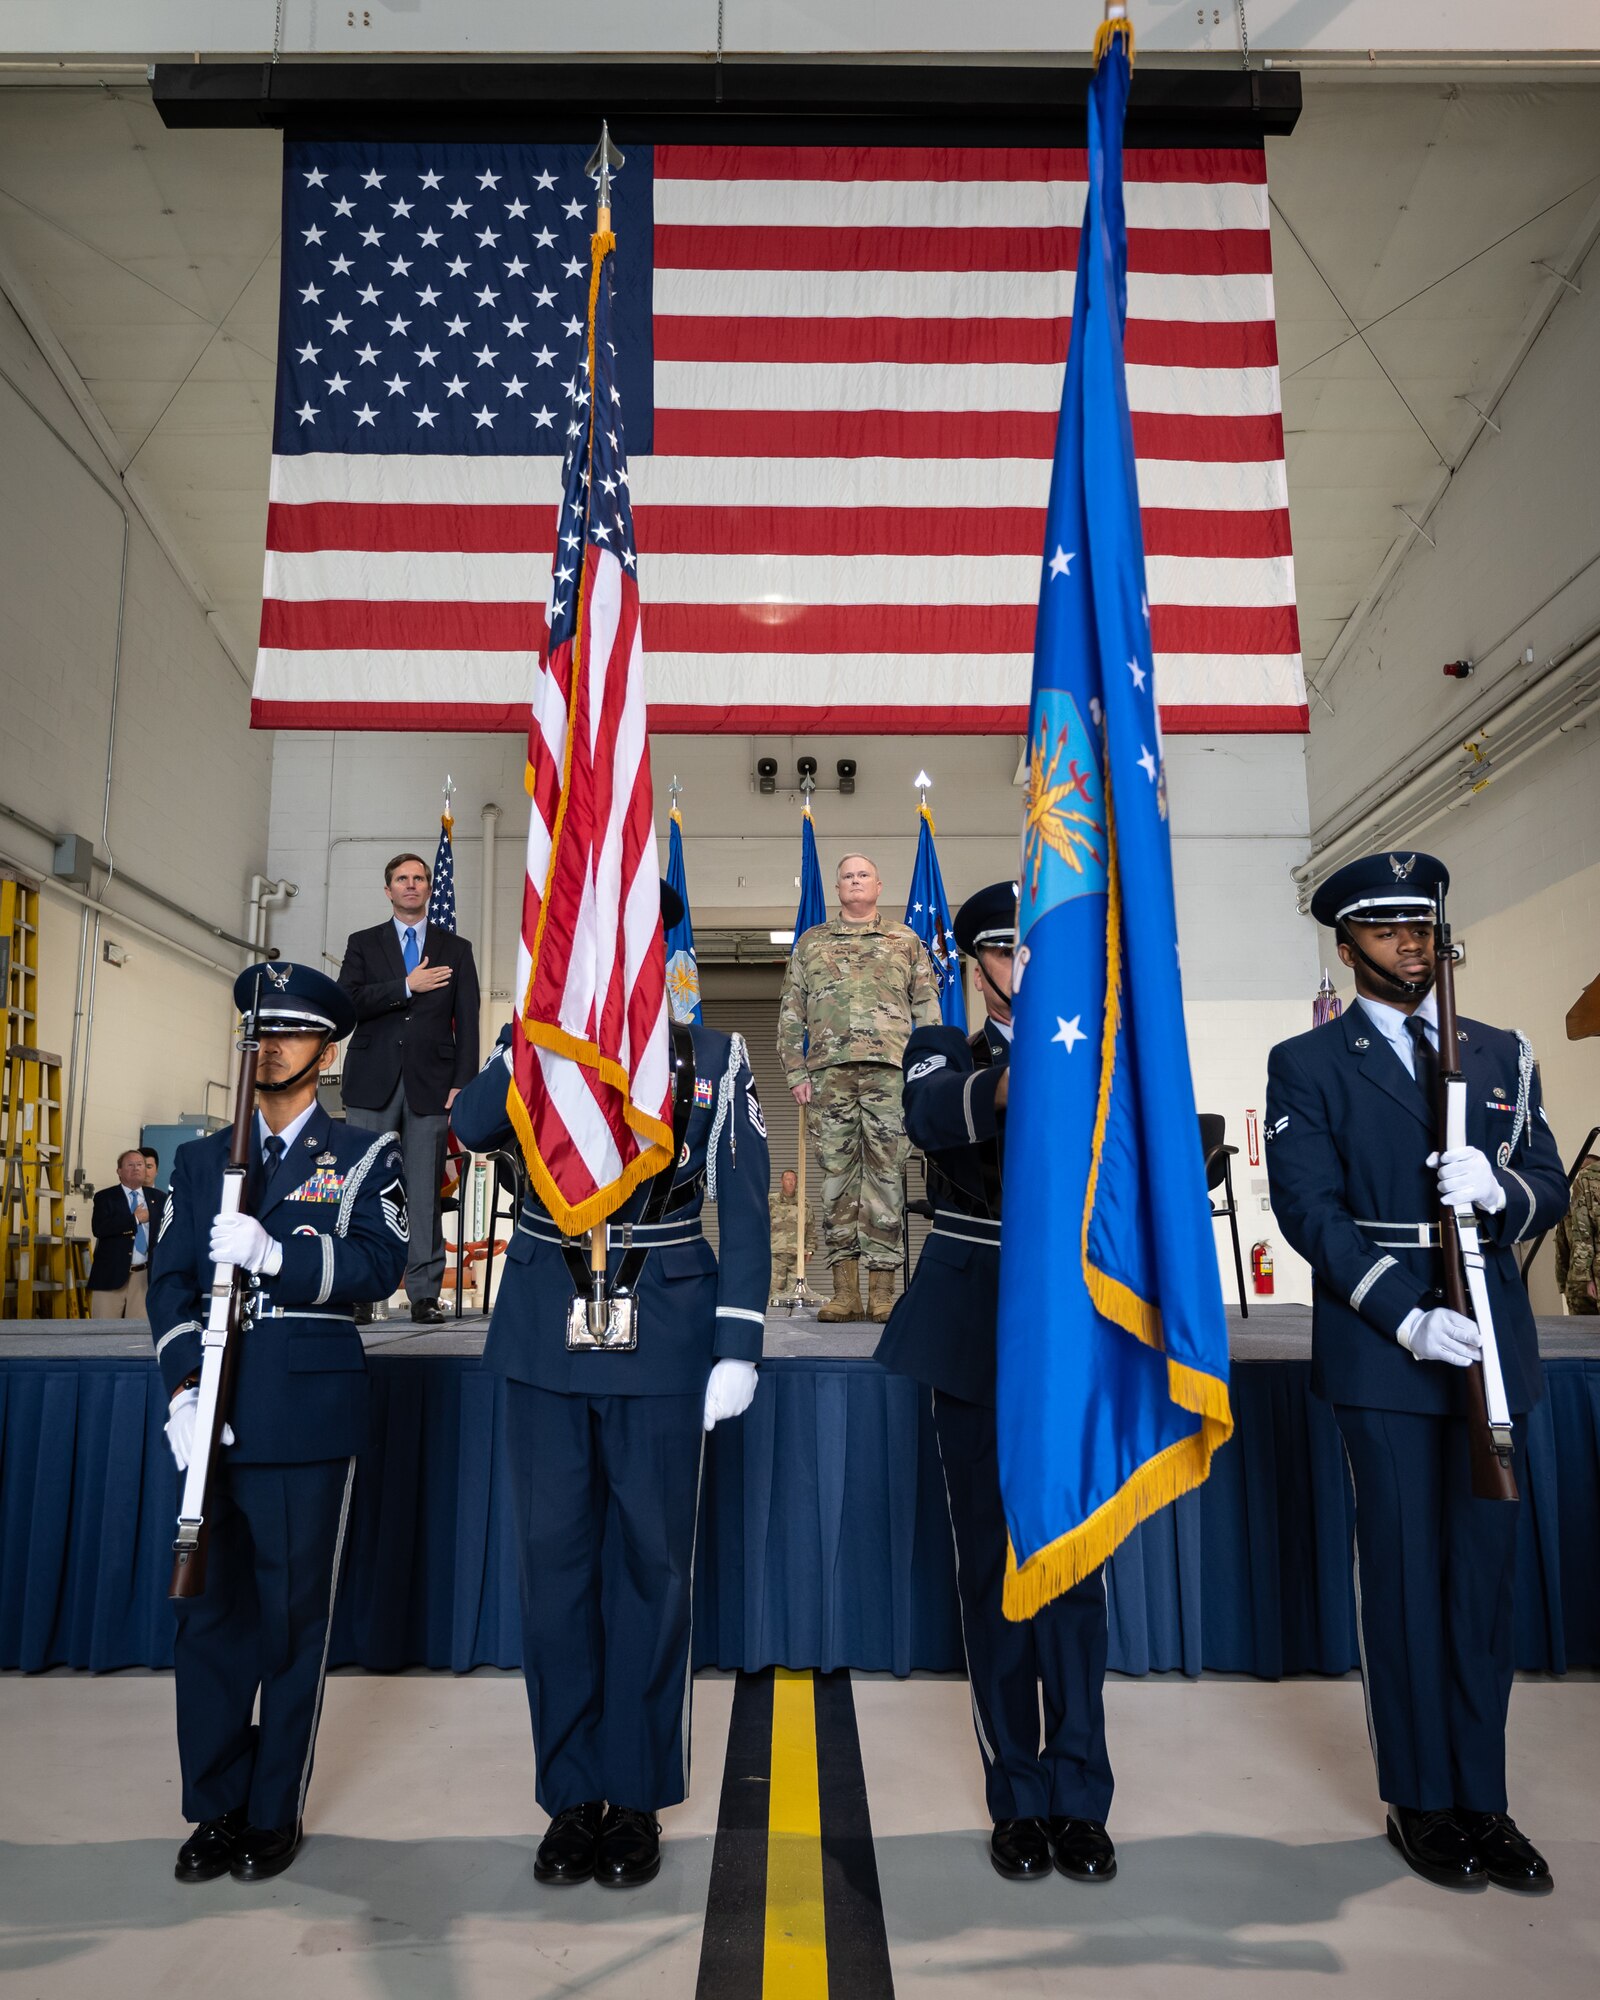 Airmen present the colors during an award ceremony at the Kentucky Air National Guard Base in Louisville, Ky., Oct. 14, 2023. The 123rd Airlift Wing received its 20th Air Force Outstanding Unit Award and a Meritorious Unit Award for superior achievement in a broad spectrum of missions around the world since 2019. (U.S. Air National Guard photo by Dale Greer)